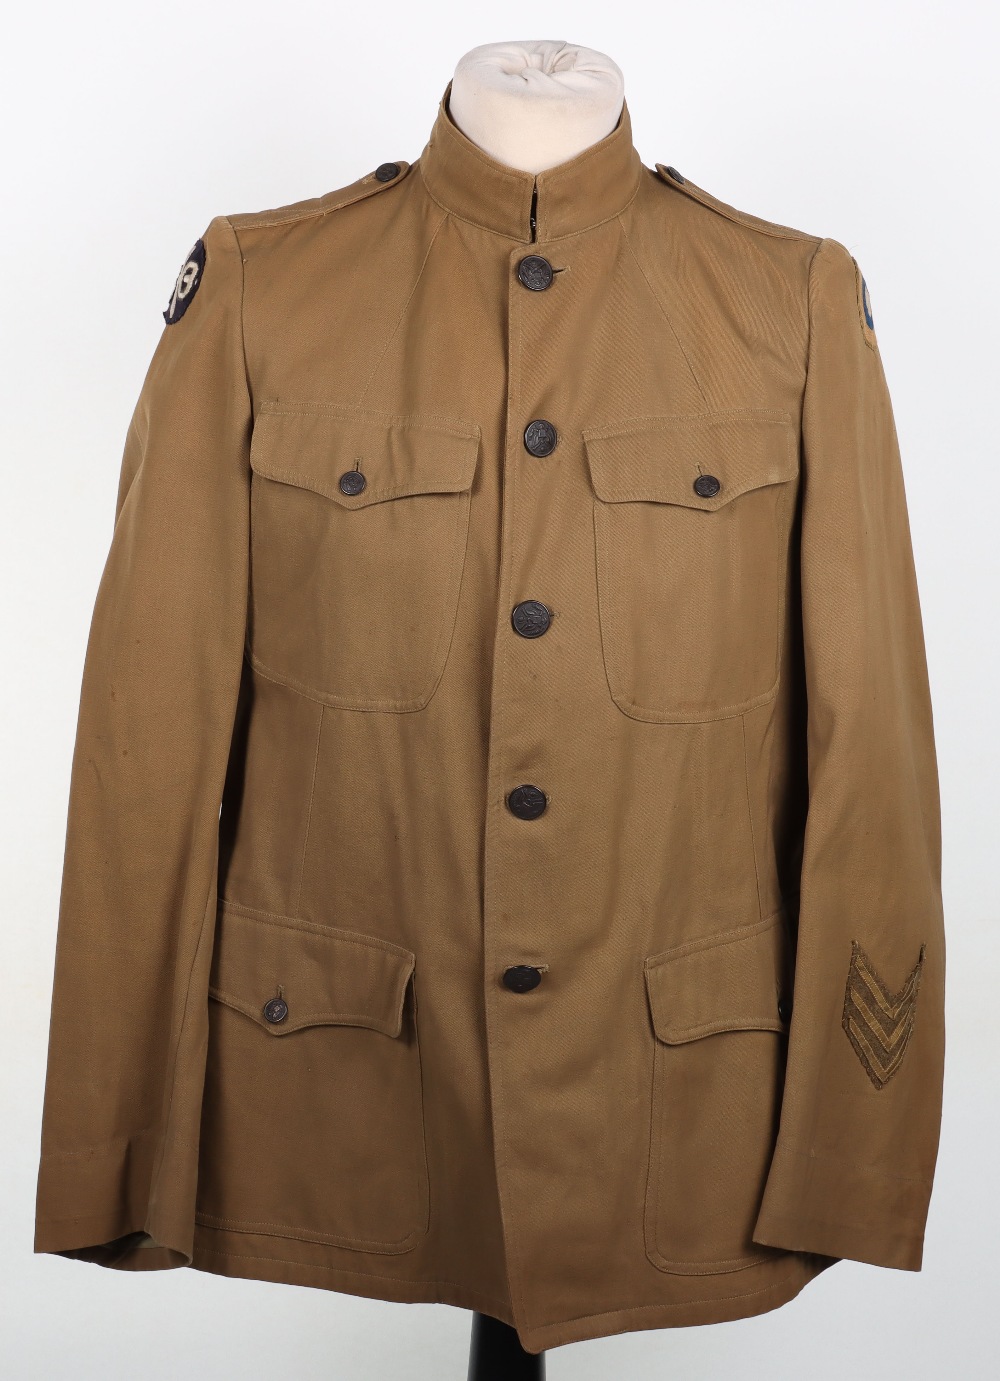 WW1 Period American Air Service Tunic - Image 6 of 11